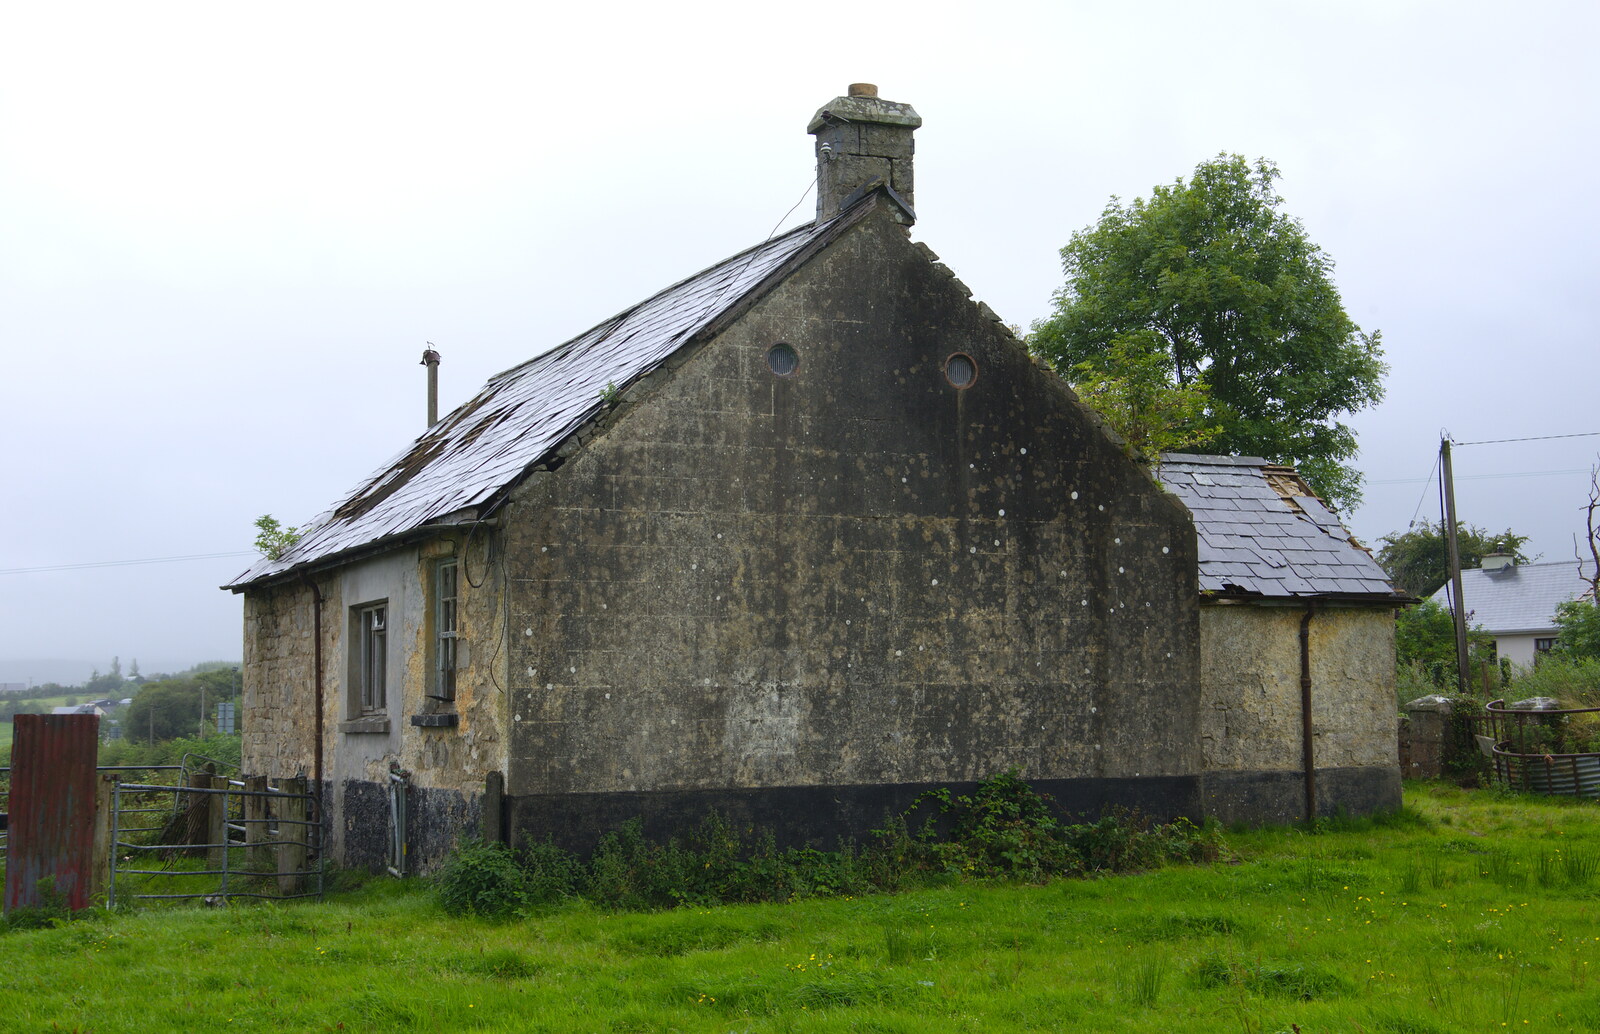 Round the back of the derelict school from Travels in the Borderlands: An Blaic/Blacklion to Belcoo and back, Cavan and Fermanagh, Ireland - 22nd August 2019